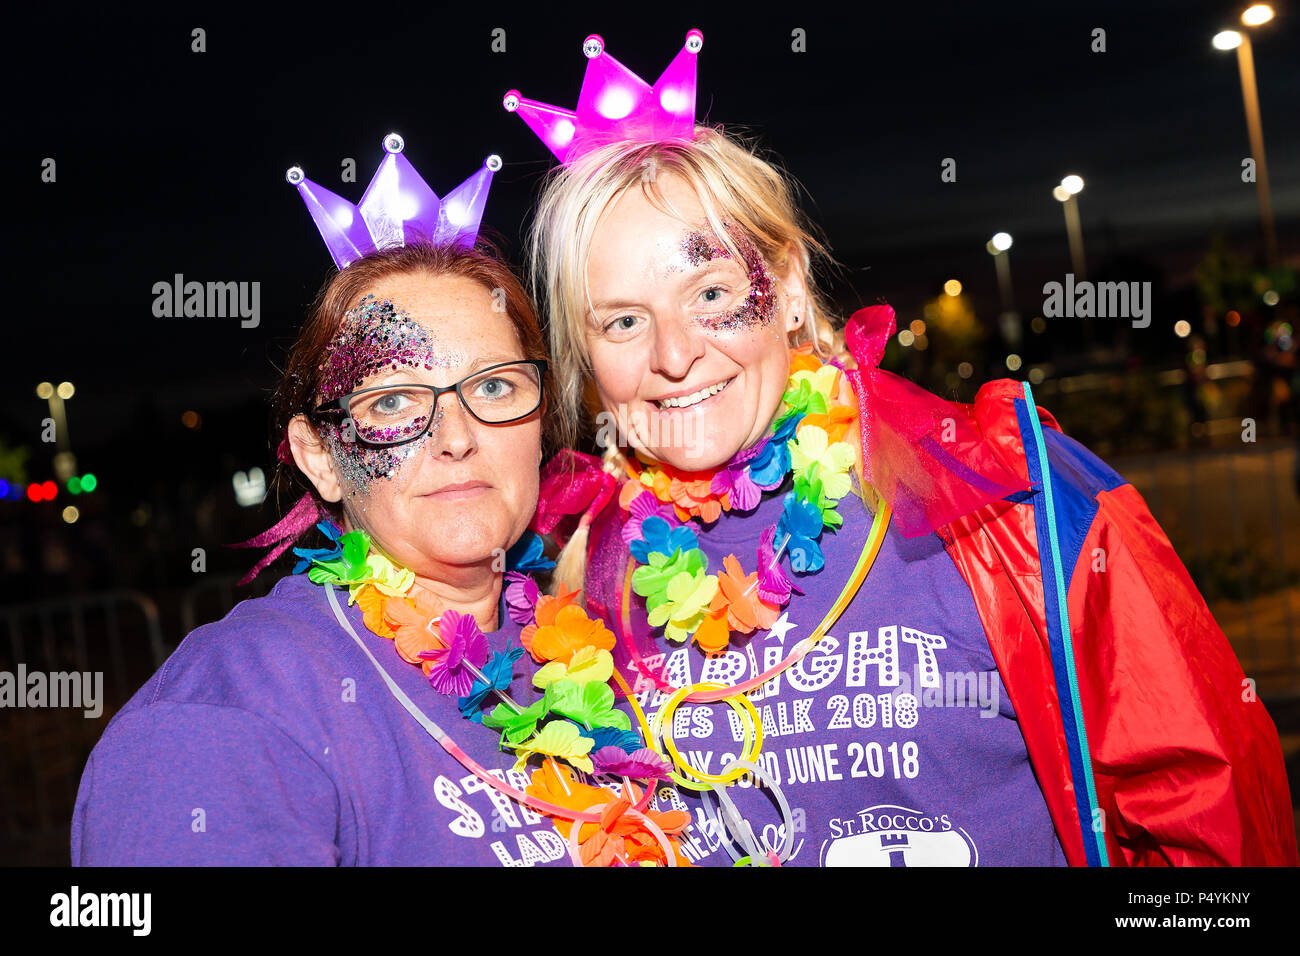 Warrington, UK. 23rd June, 2018. 23 June 2018 - Starlight Ladies Walk, a sponsored ladies-only walk which begins at midnight at the Orford Jubilee Neighbourhood Hub. The aim is to raise as much money as possible for St. Rocco’s Hospice a Registered Charity that provides specialist care and support across Warrington, helping those who are coping with a life-limiting illness. Credit: John Hopkins/Alamy Live News Stock Photo